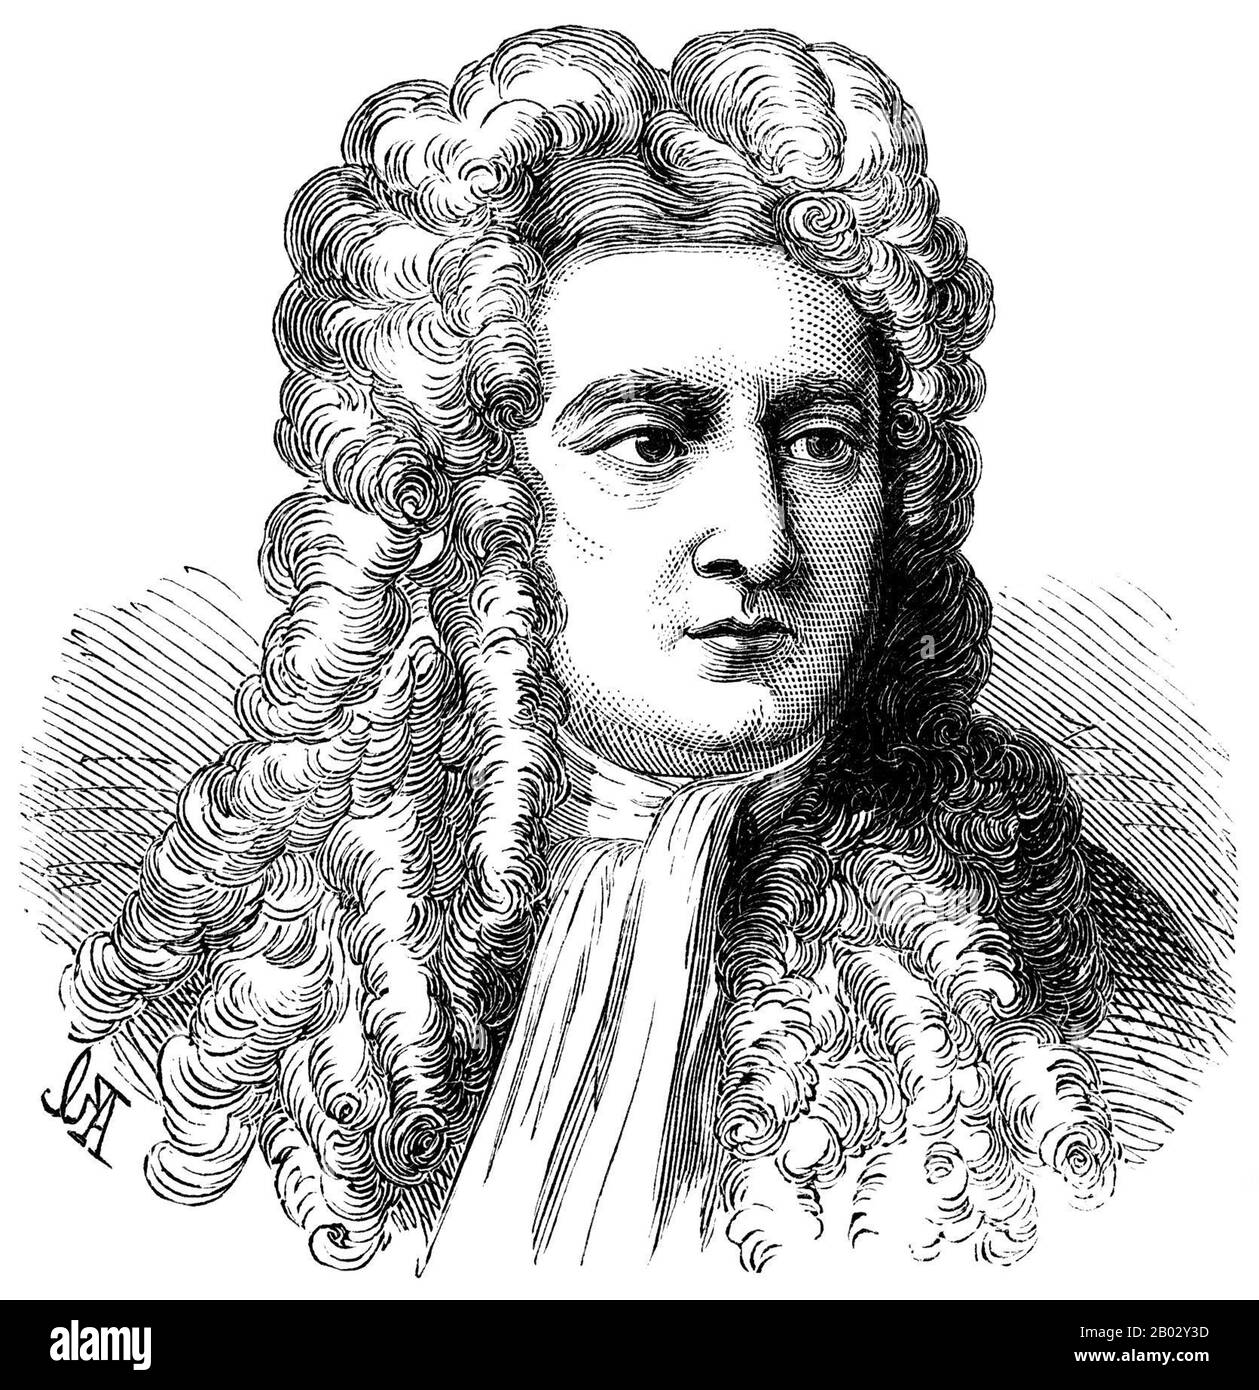 Sir Isaac Newton PRS MP (25 December 1642 – 20 March 1726)  was an English physicist and mathematician (described in his own day as a 'natural philosopher') who is widely recognised as one of the most influential scientists of all time and as a key figure in the scientific revolution.  His book Philosophiæ Naturalis Principia Mathematica ('Mathematical Principles of Natural Philosophy'), first published in 1687, laid the foundations for classical mechanics. Newton made seminal contributions to optics, and he shares credit with Gottfried Leibniz for the development of calculus. Stock Photo